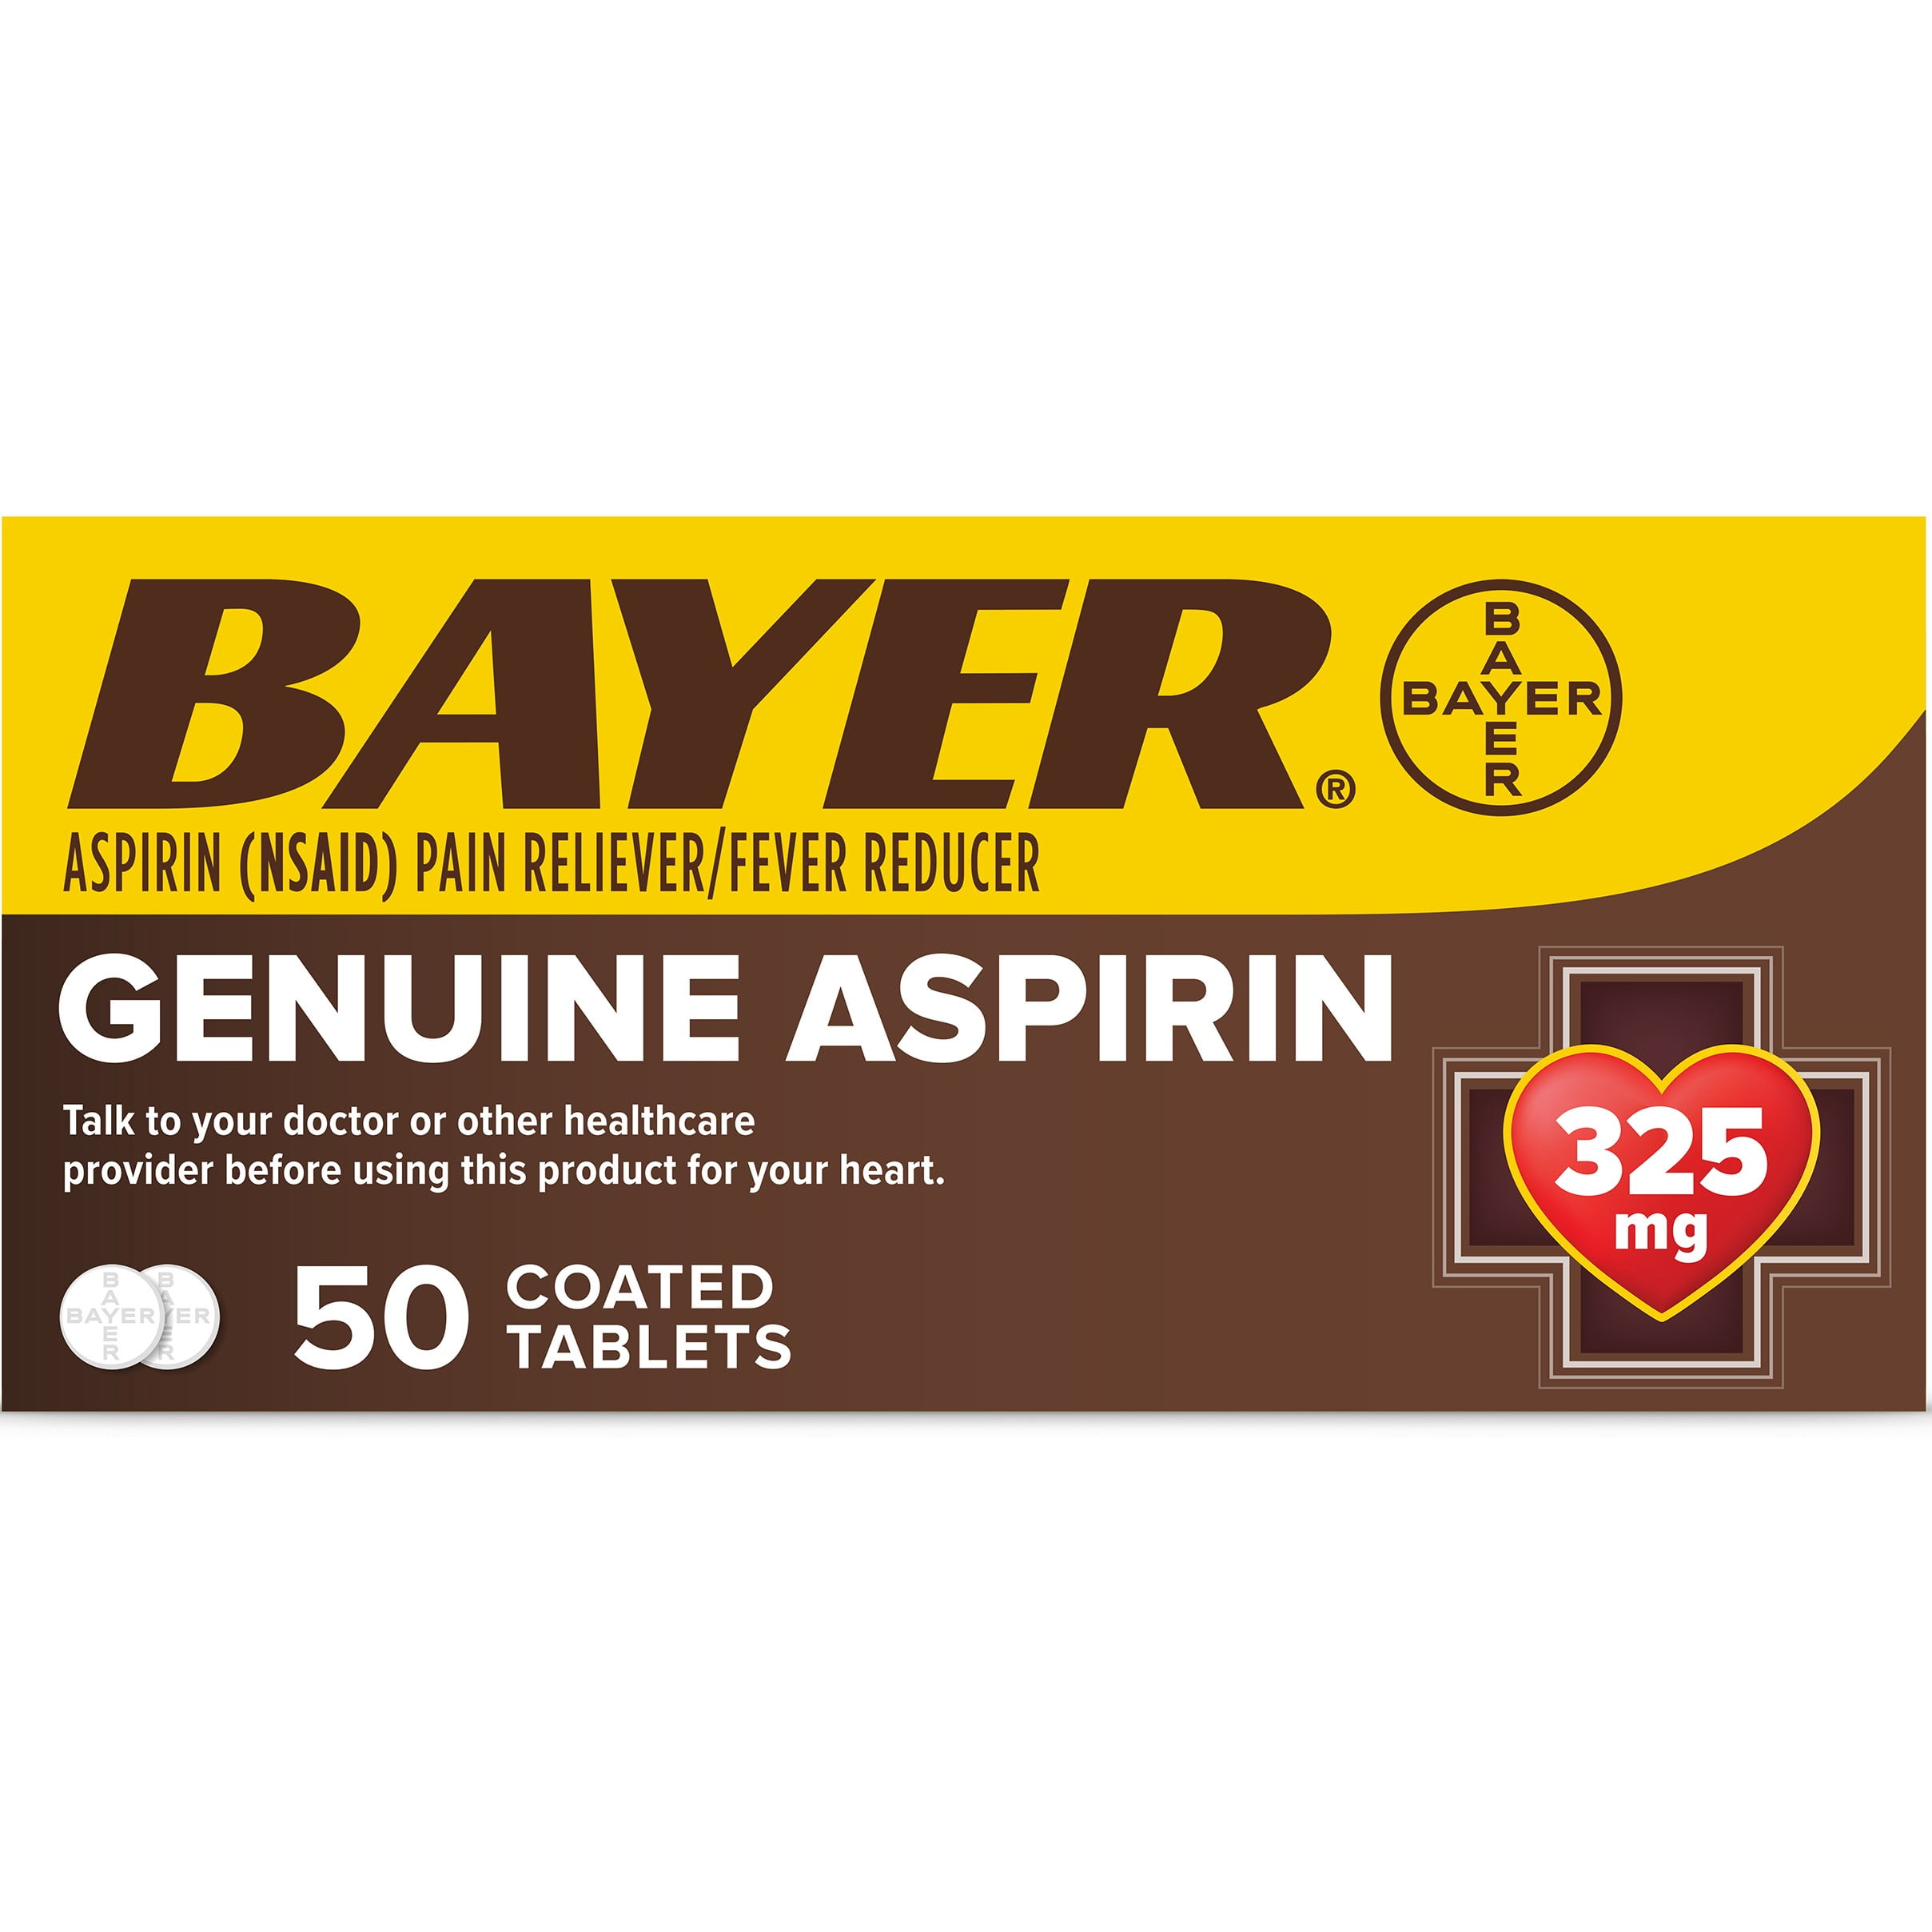 Genuine Bayer Aspirin Pain Reliever / Fever Reducer 325mg Coated Tablets, 50 Ct